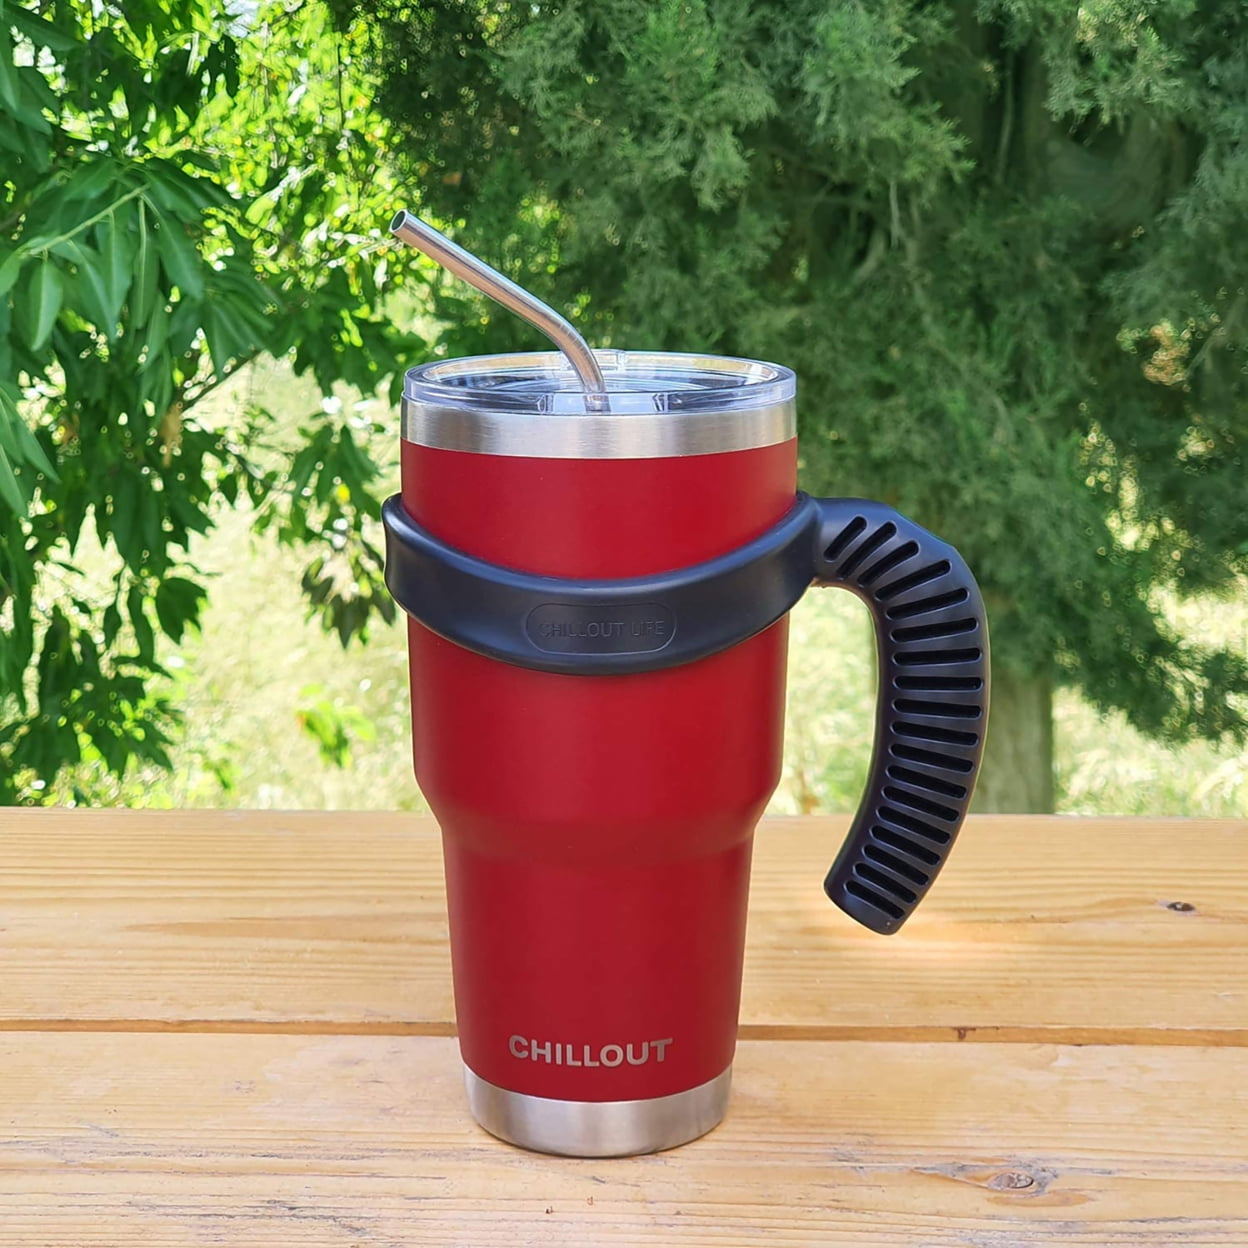 CHILLOUT LIFE Stainless Steel 16 oz Vacuum Insulated Coffee Mug with Handle  and Lid, Large Thermal C…See more CHILLOUT LIFE Stainless Steel 16 oz